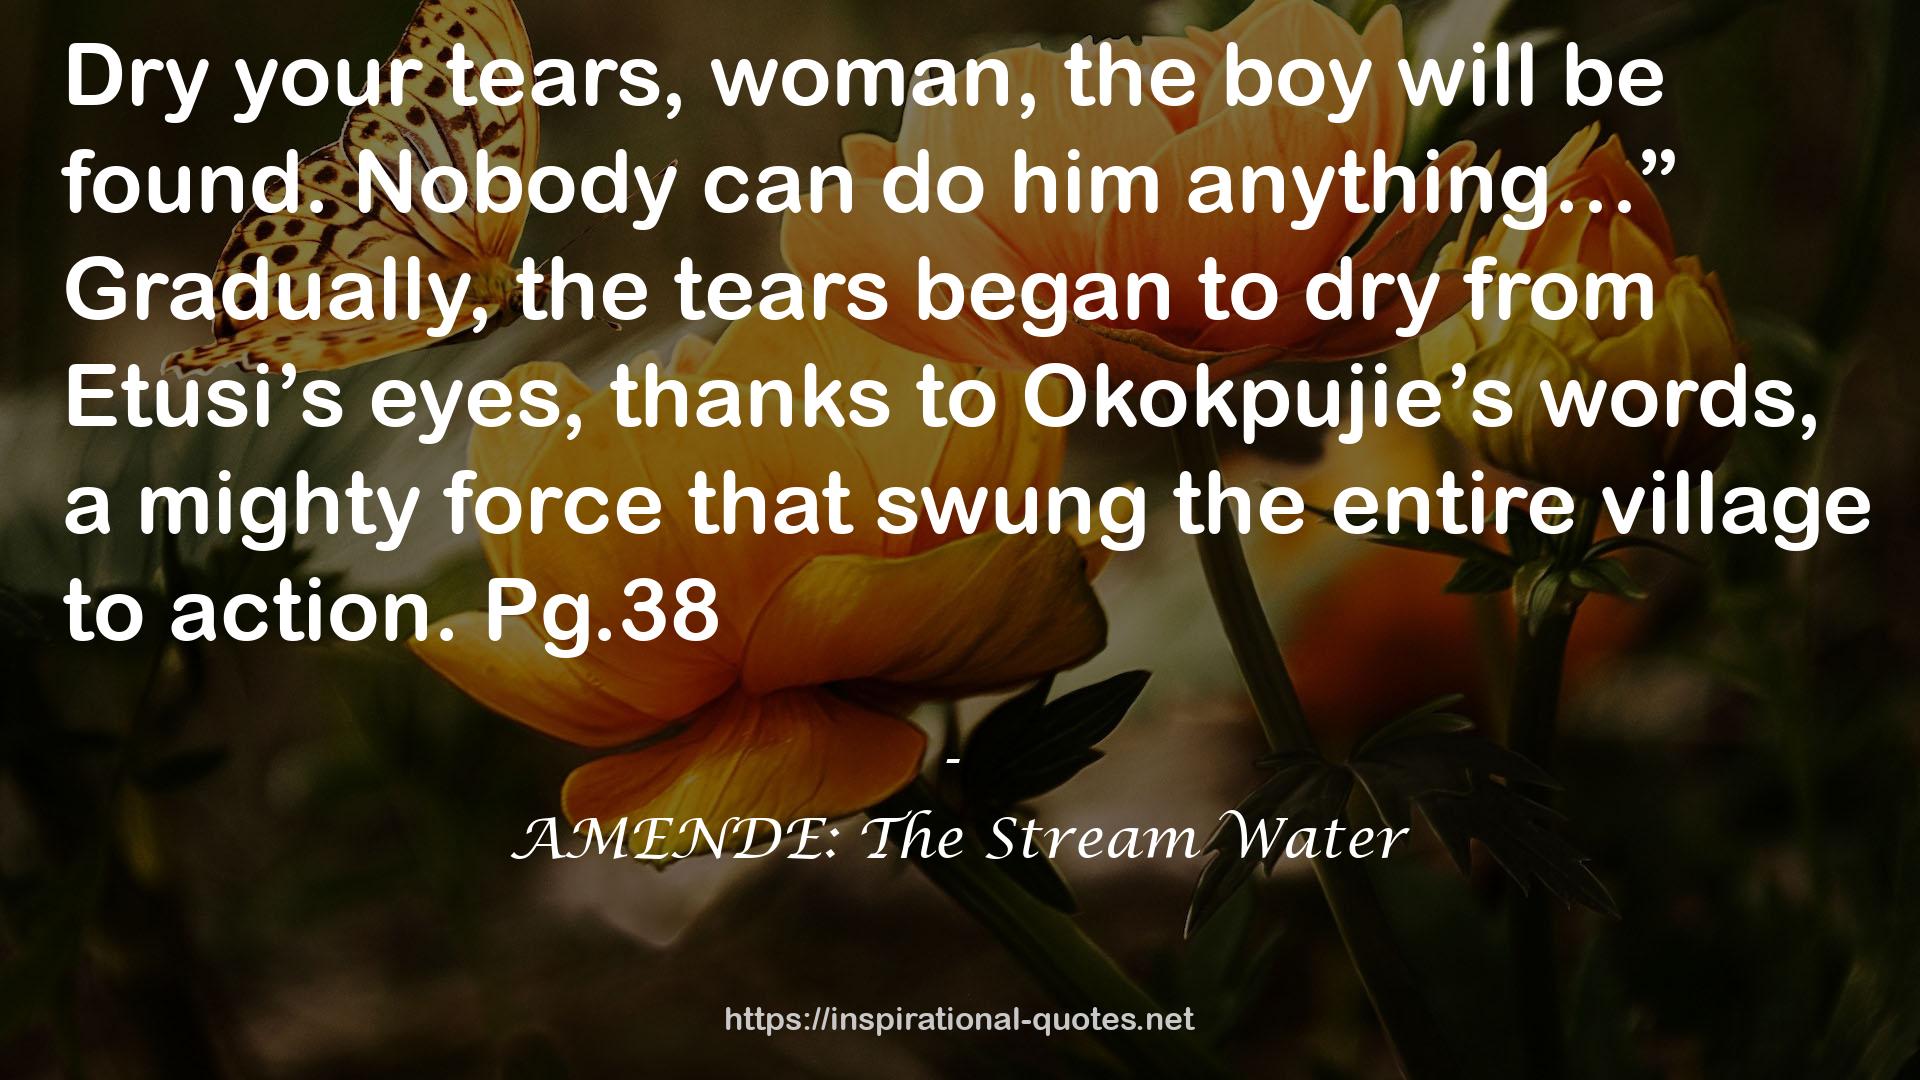 AMENDE: The Stream Water QUOTES